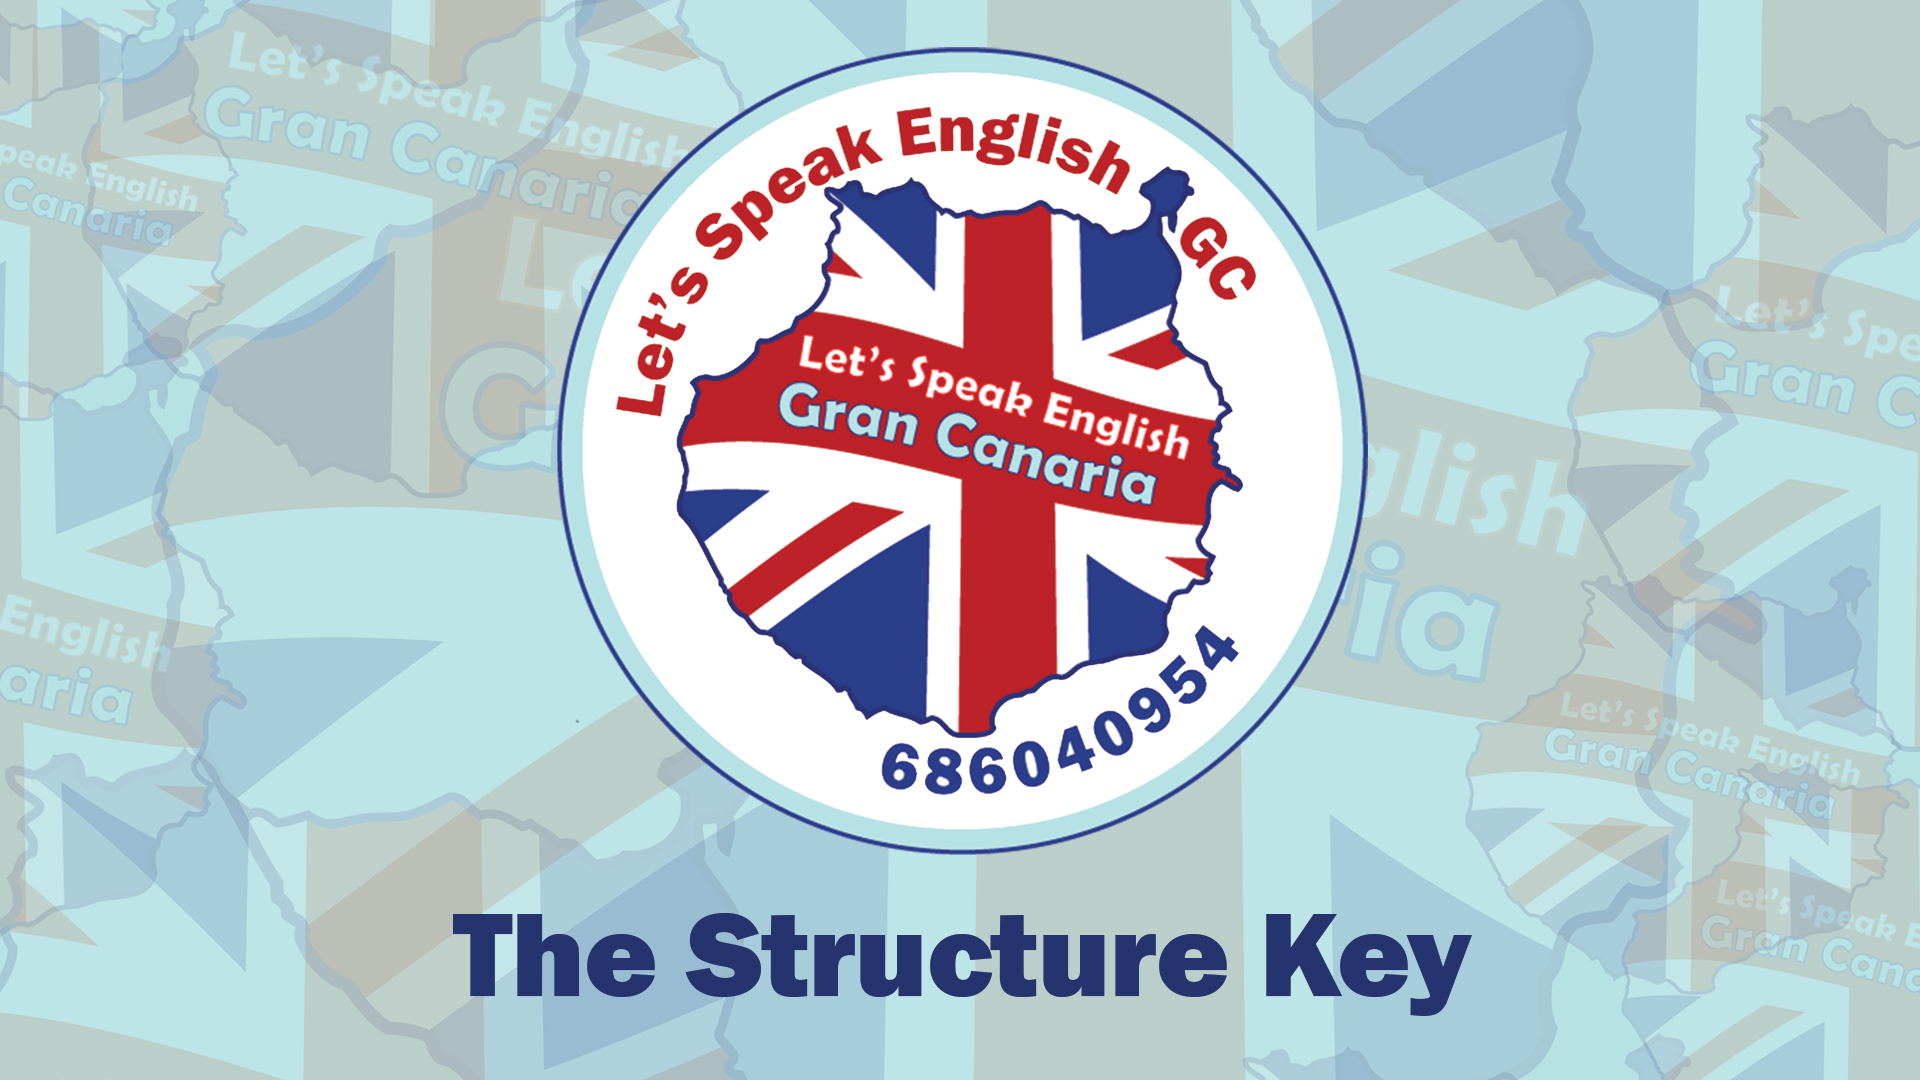 The Structure Key